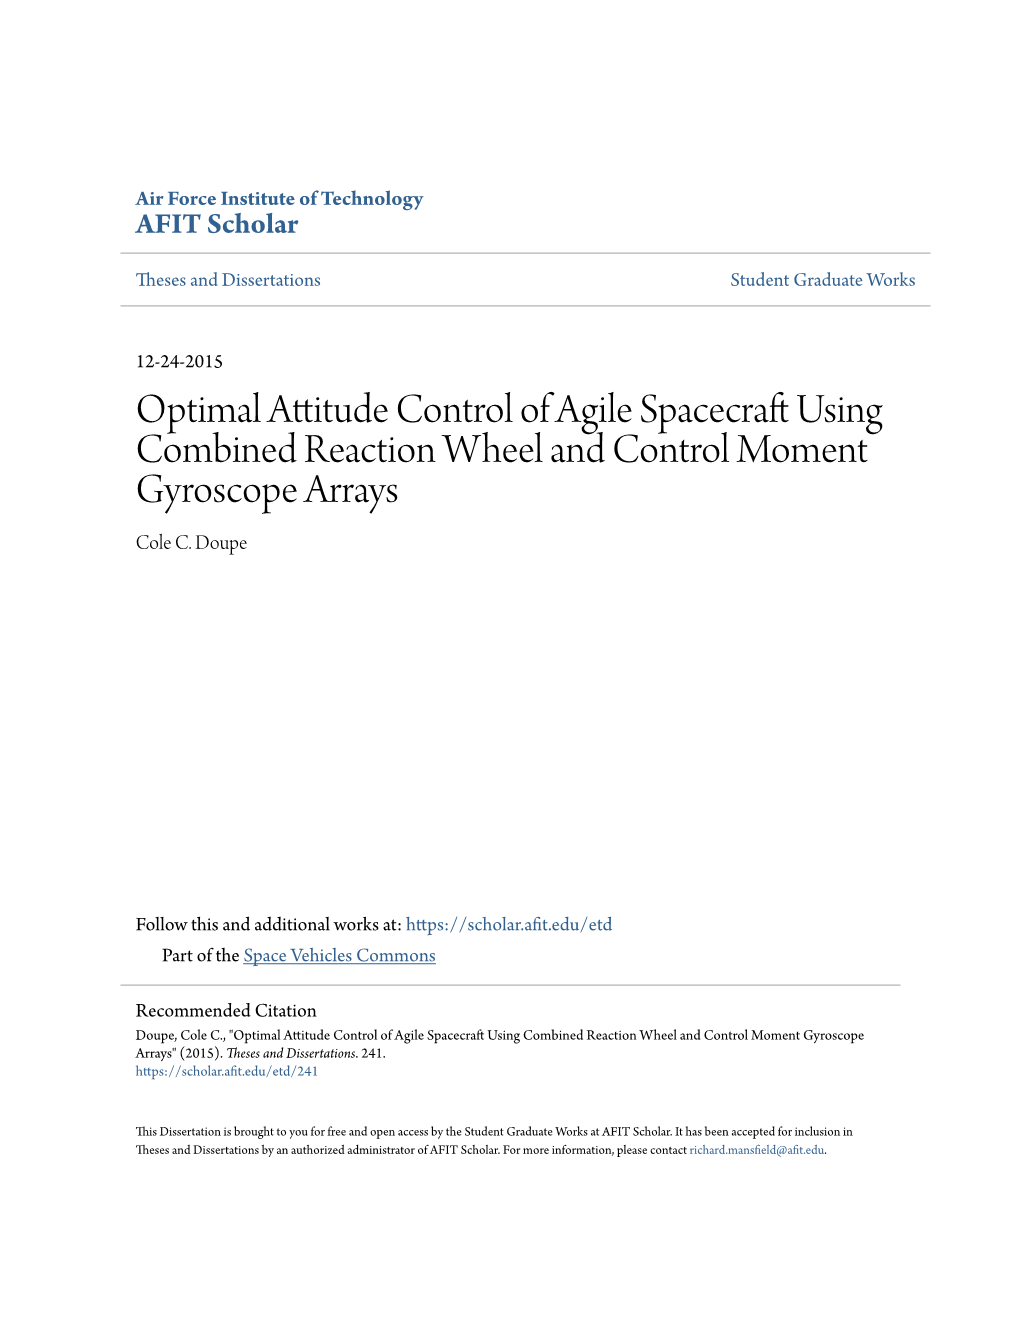 Optimal Attitude Control of Agile Spacecraft Using Combined Reaction Wheel and Control Moment Gyroscope Arrays